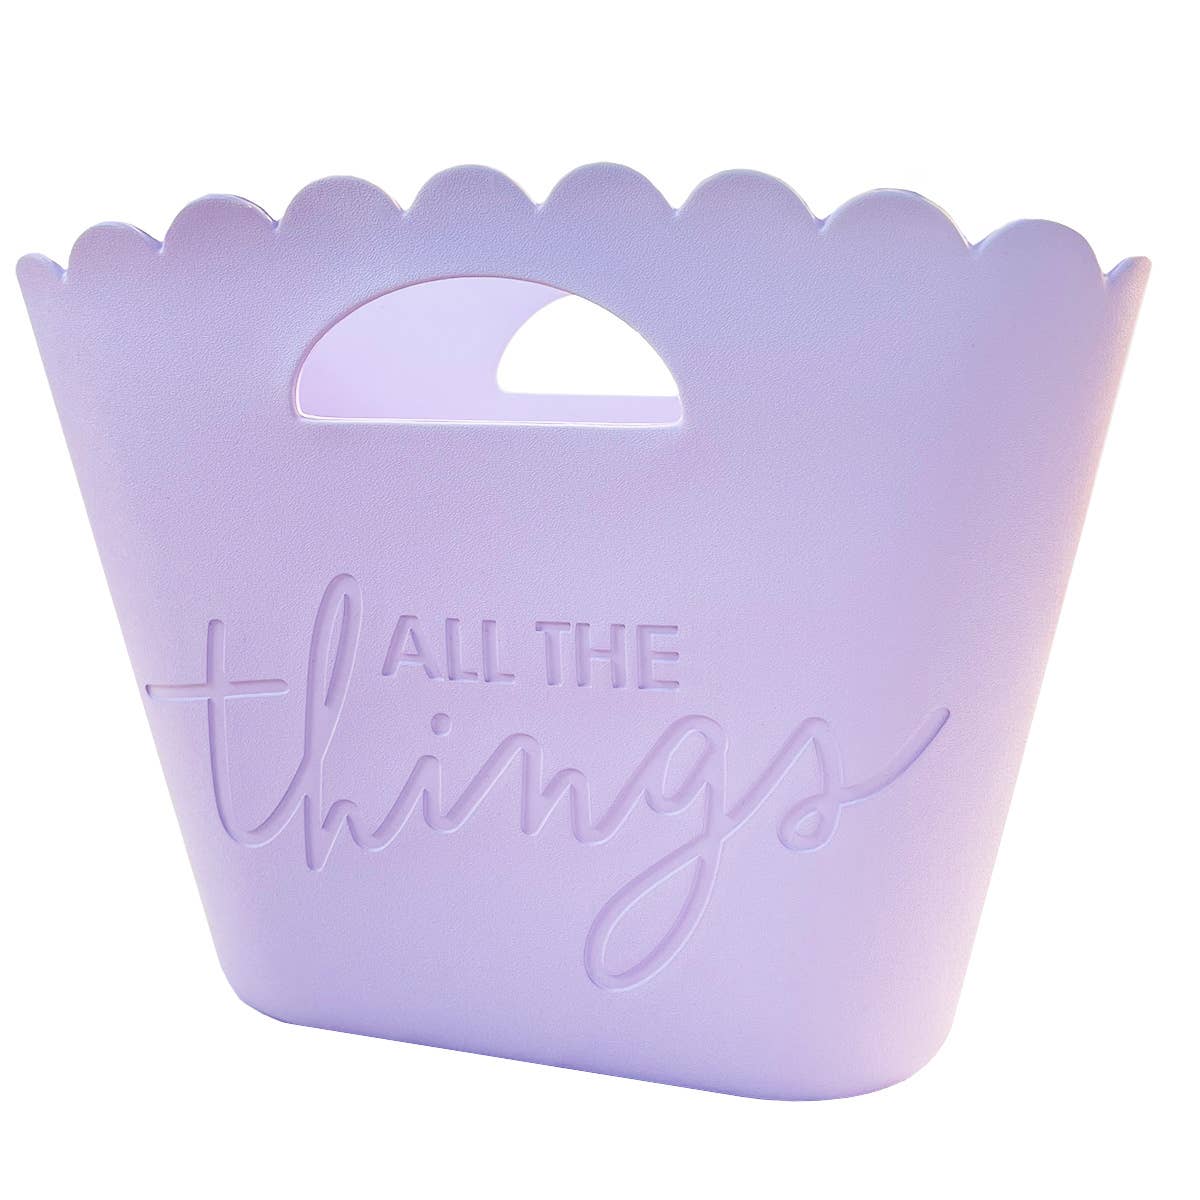 All The Things! Lavender Scallop Tote